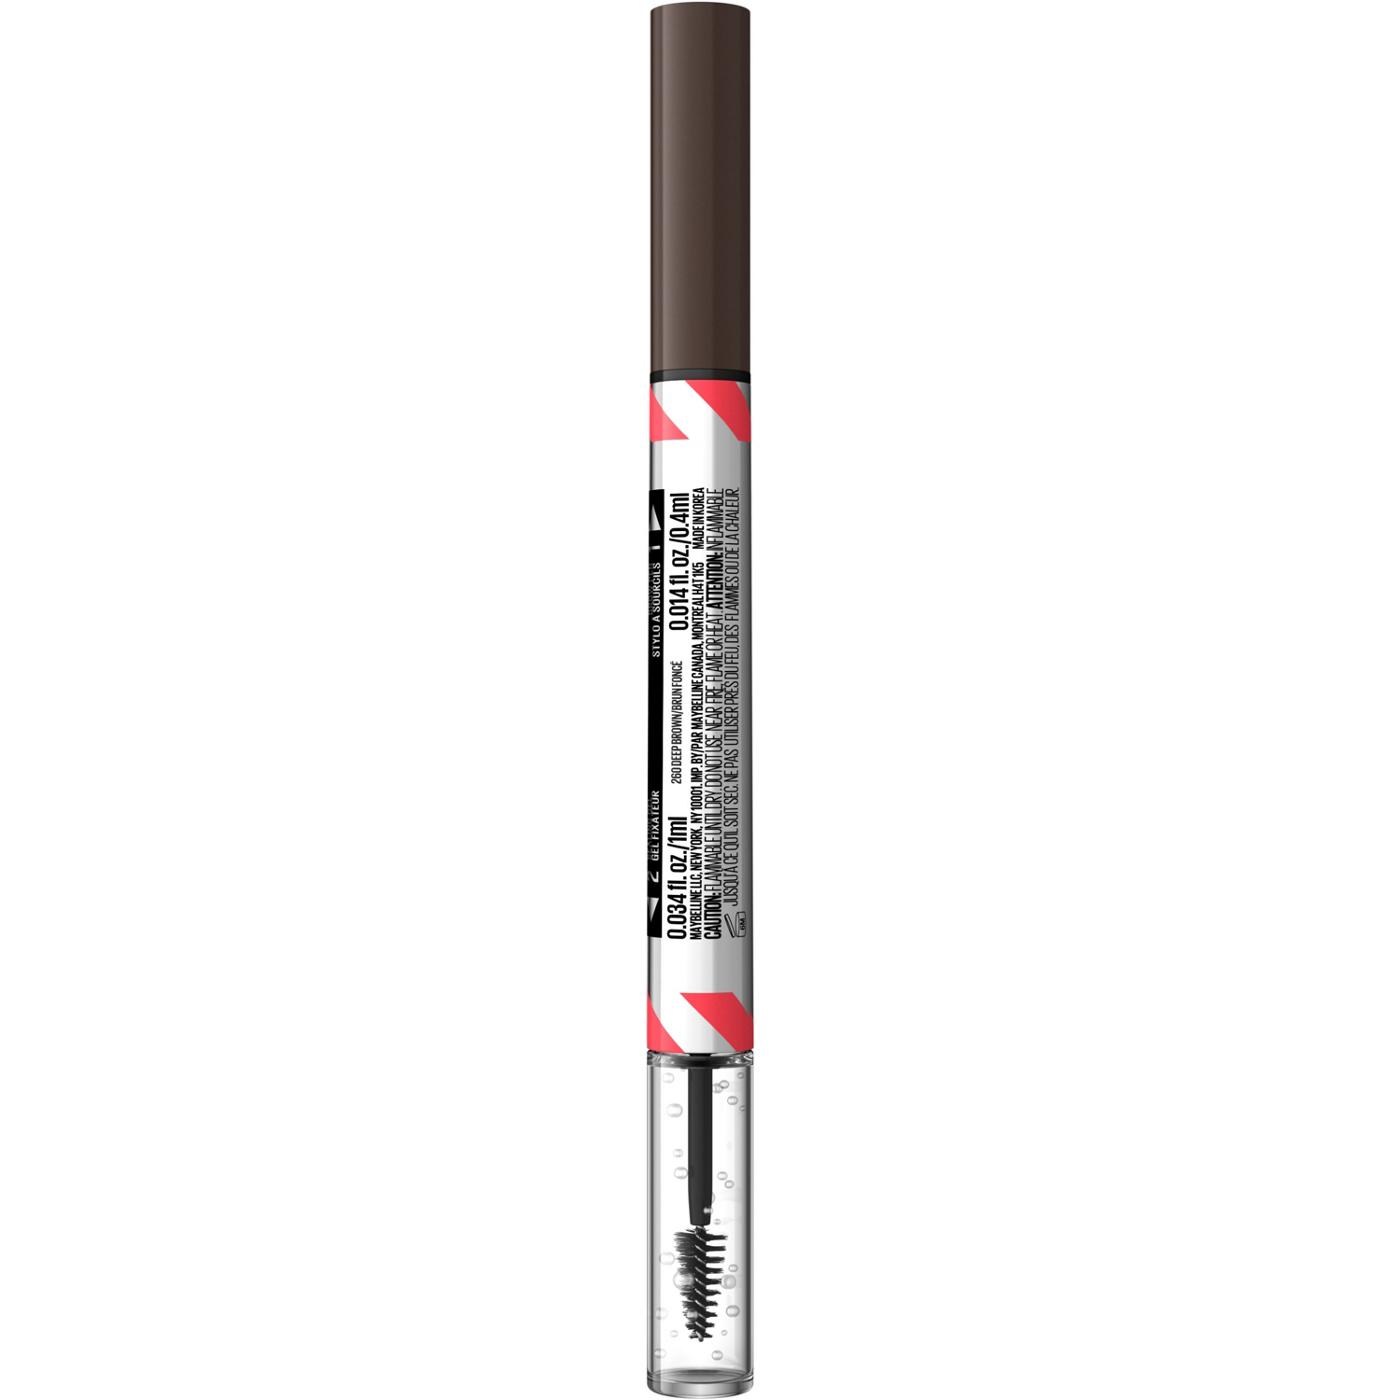 Maybelline Build A Brow 2 In 1 Brow Pen - Deep Brown; image 13 of 17